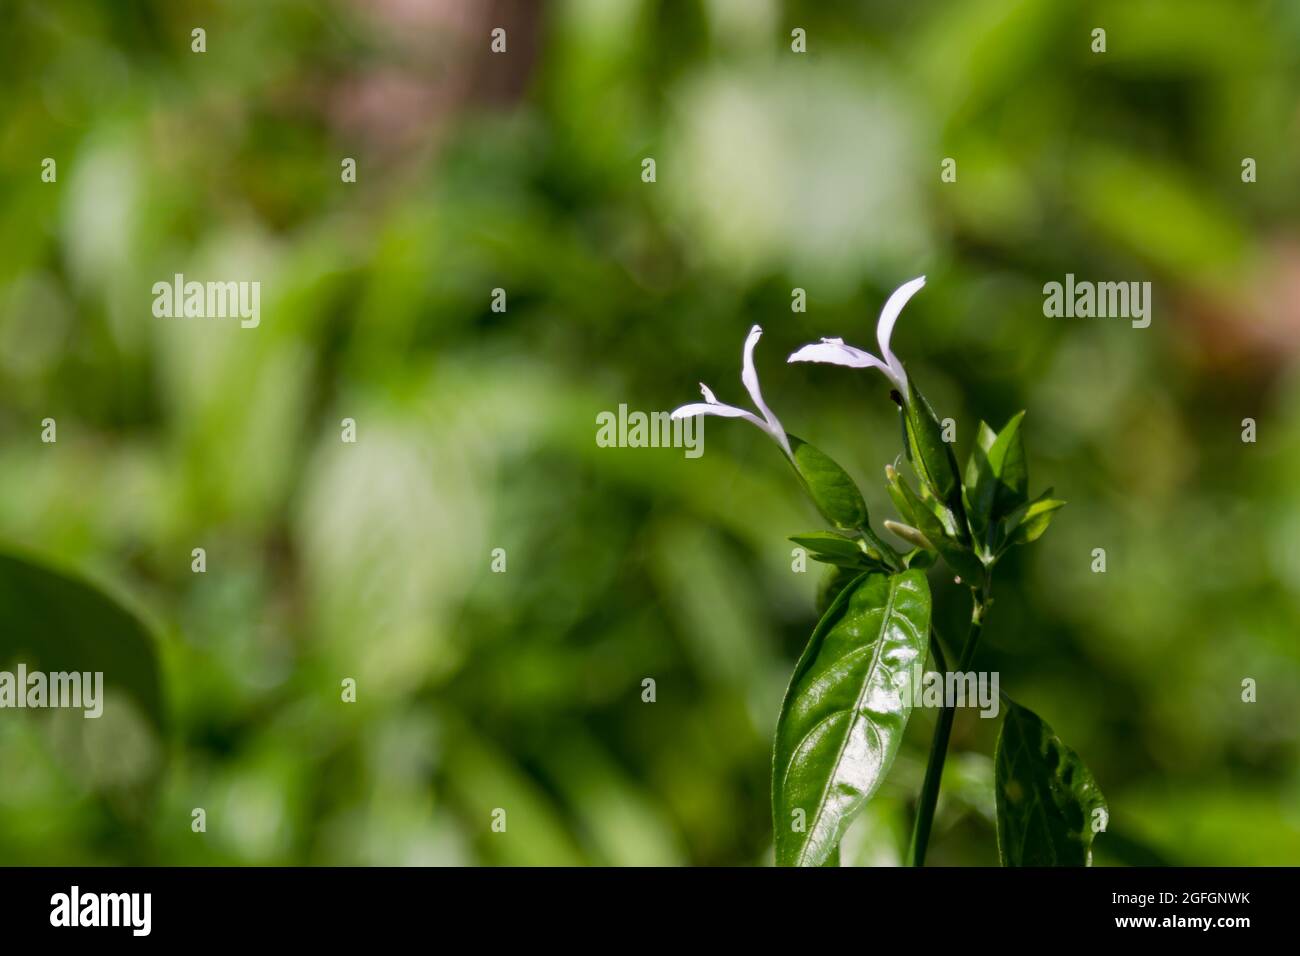 Small shrubs appear among the thick leaves with small white flowers Stock Photo